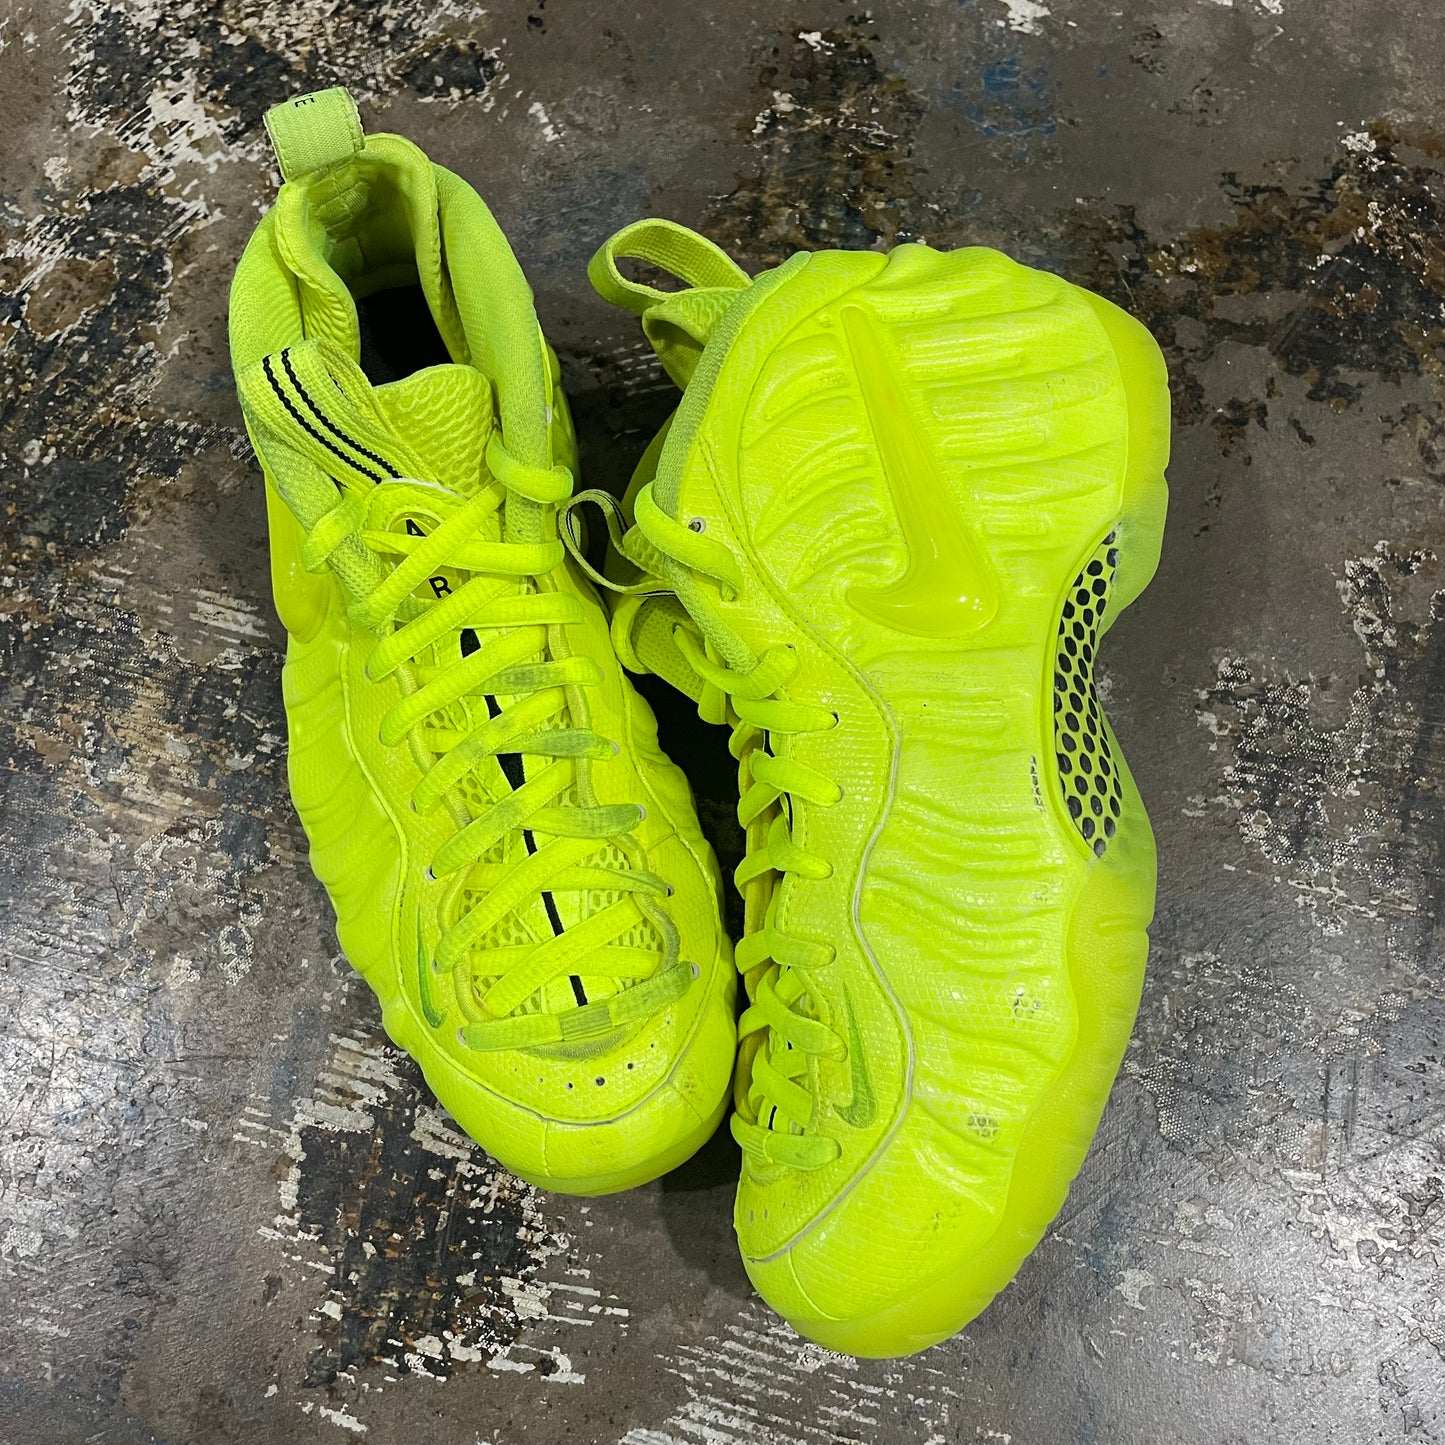 Nike FoamPosite Highlighter Size 7.5Y (HOU) (Trusted Club)